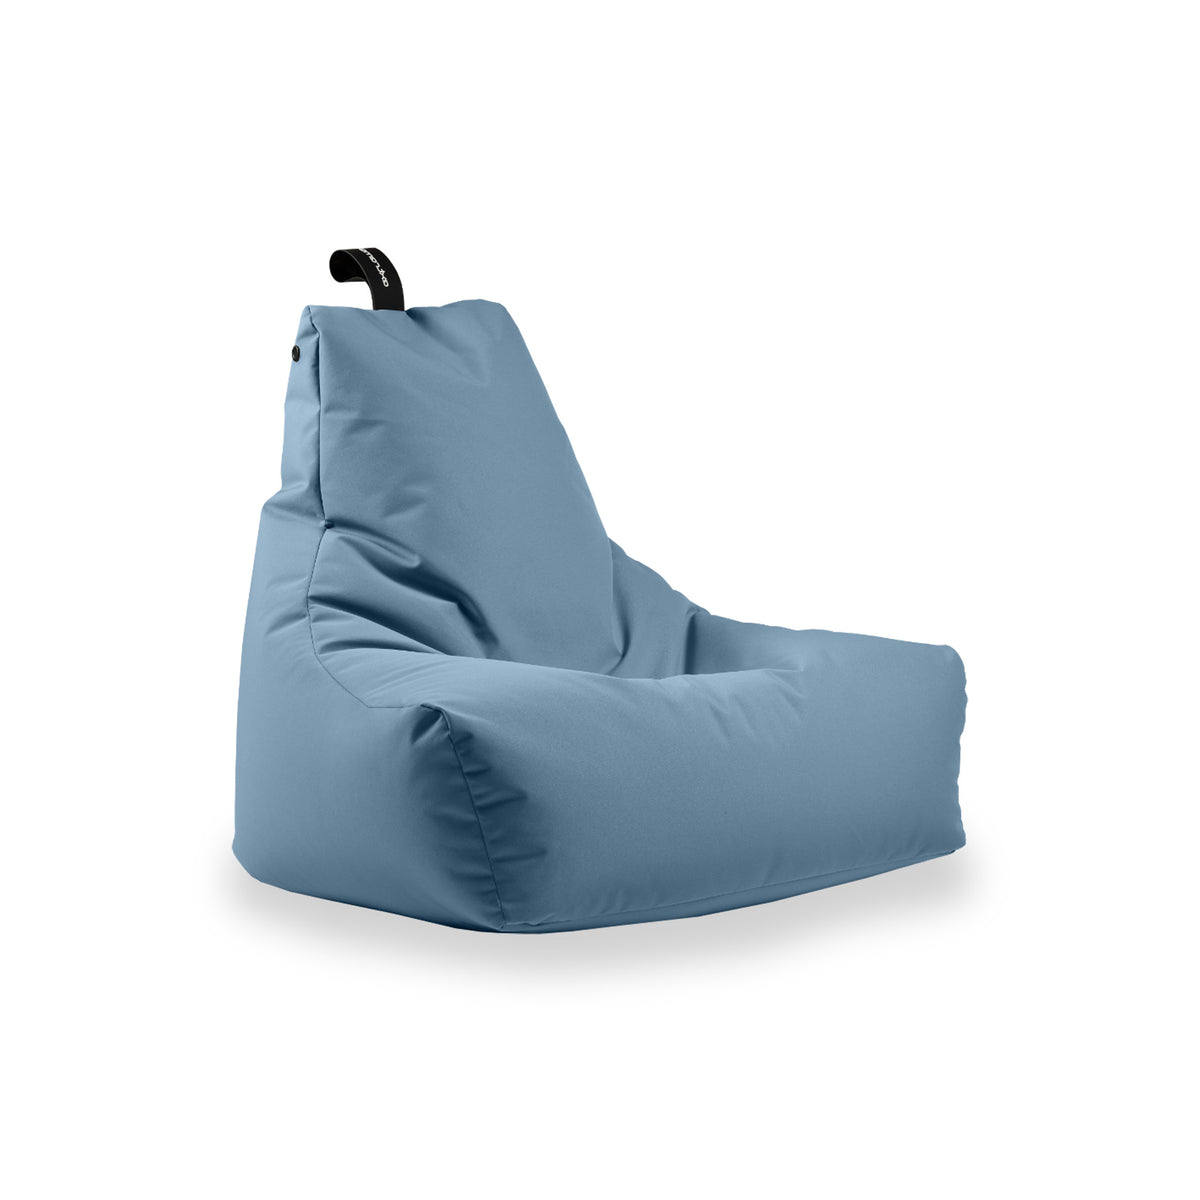 Mighty B Beanbag in Sea Blue from Roseland Furniture